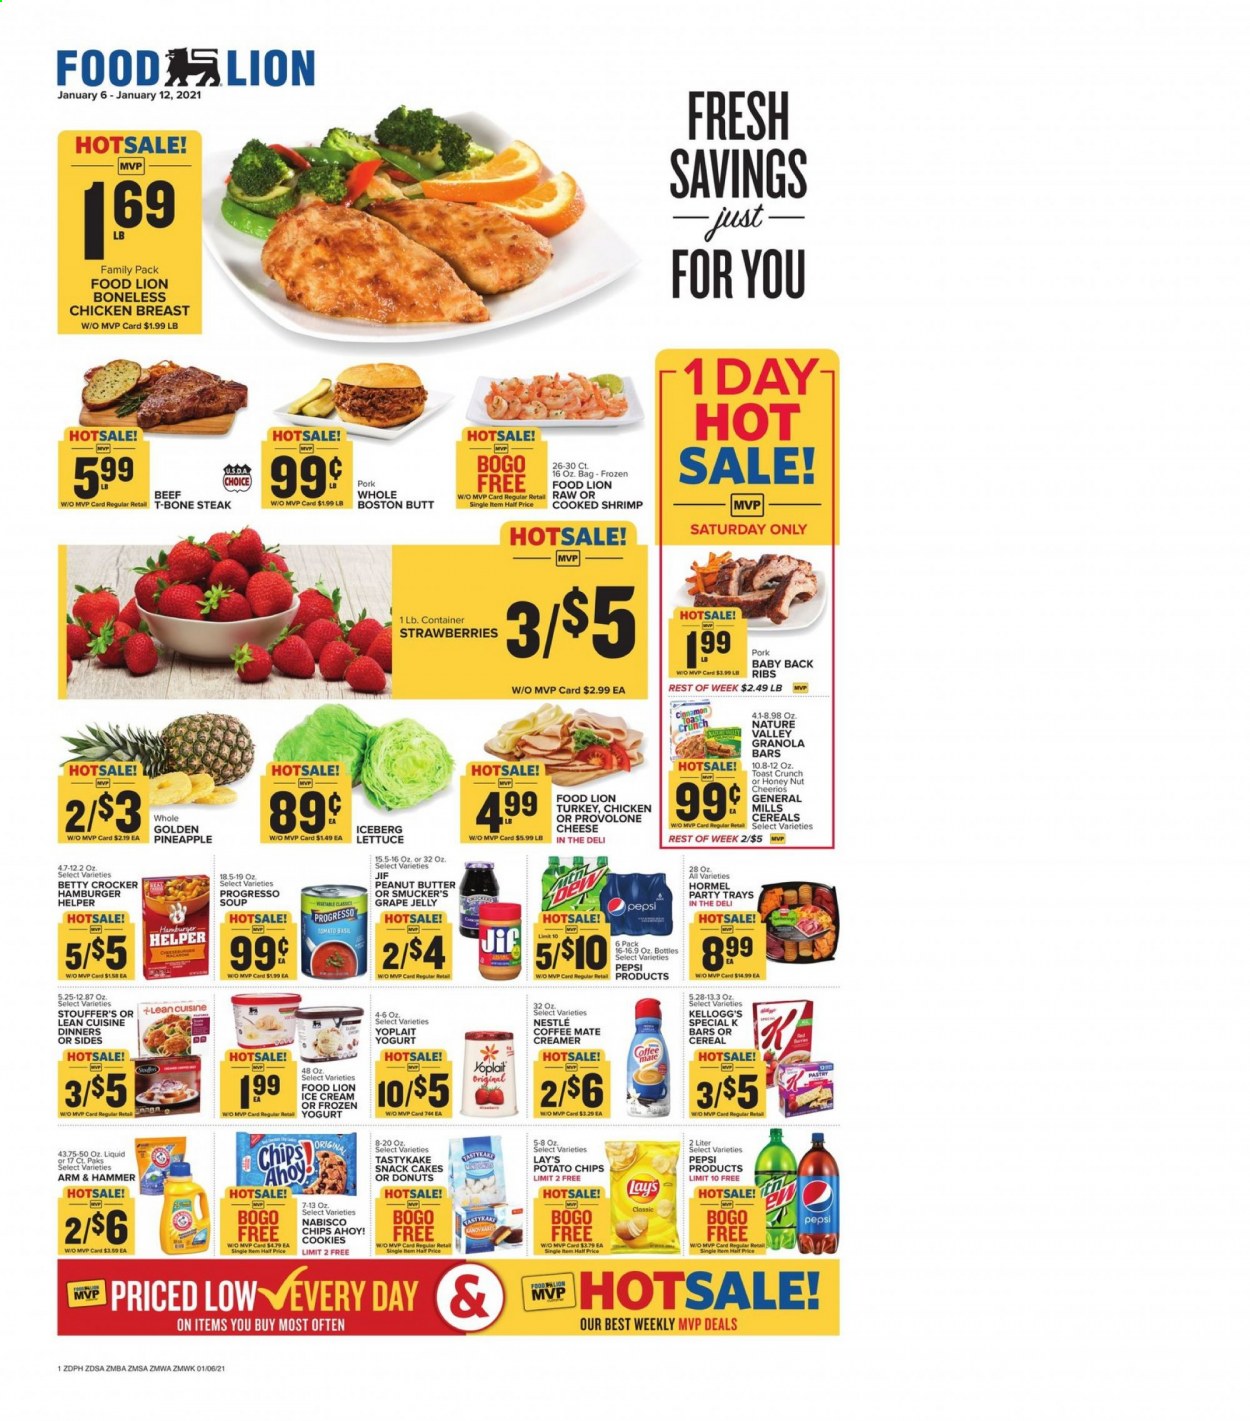 thumbnail - Food Lion Flyer - 01/06/2021 - 01/12/2021 - Sales products - lettuce, toast bread, cake, donut, shrimps, Progresso, Lean Cuisine, Hormel, cheese, Provolone, yoghurt, jelly, Yoplait, Coffee-Mate, creamer, ice cream, strawberries, Stouffer's, cookies, Nestlé, Kellogg's, Chips Ahoy!, potato chips, snack, Lay’s, ARM & HAMMER, Cheerios, granola bar, Nature Valley, esponja, cinnamon, grape jelly, peanut butter, Jif, Pepsi, chicken breasts, beef meat, t-bone steak, steak, pork meat, pork back ribs. Page 1.